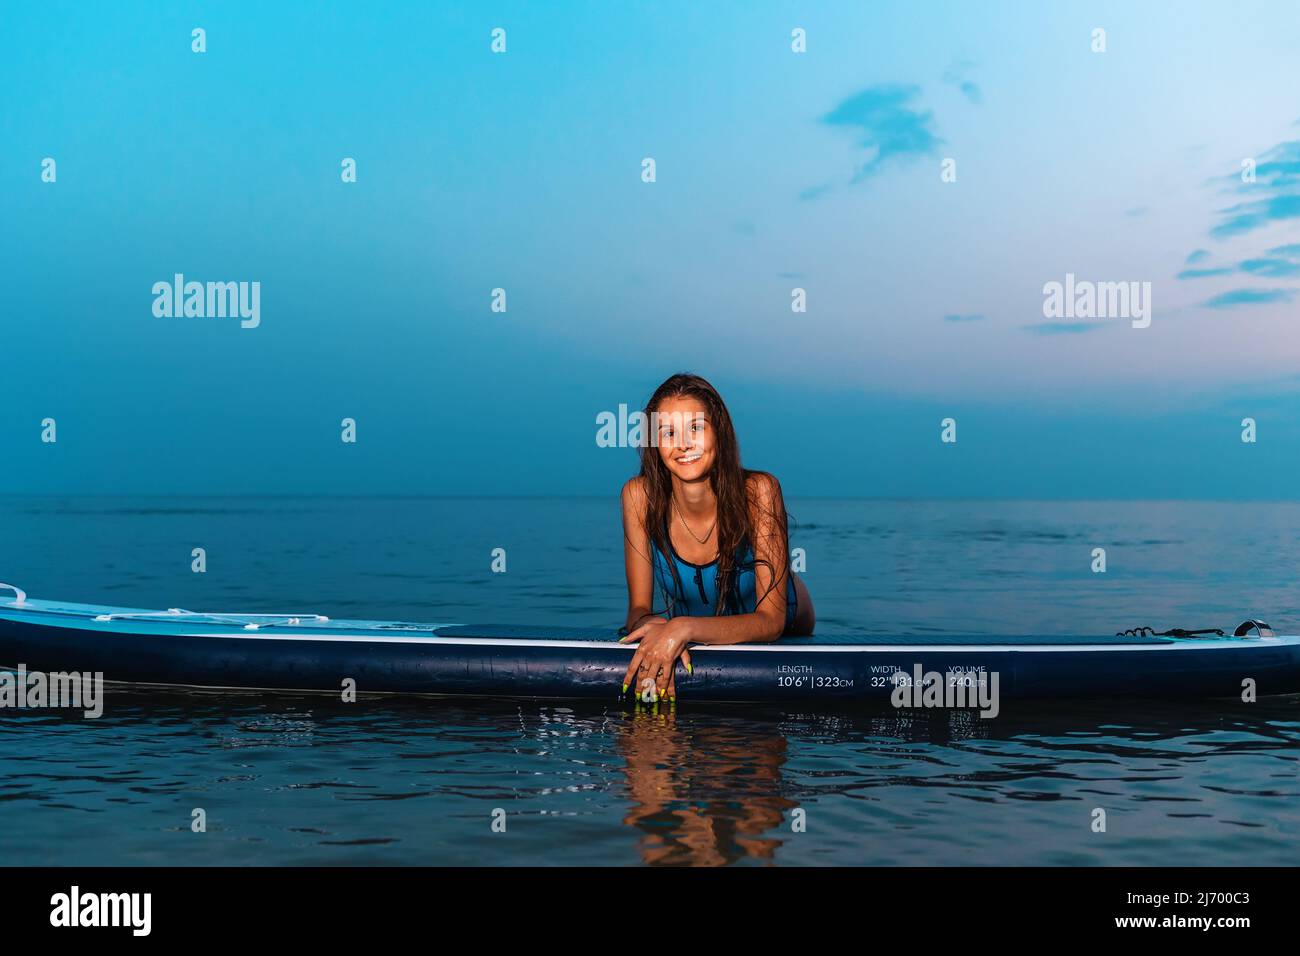 Summer sport. Portrait of young smiling tanned woman poses leaning on a sup board. Copy space. Concept of surfing. Stock Photo